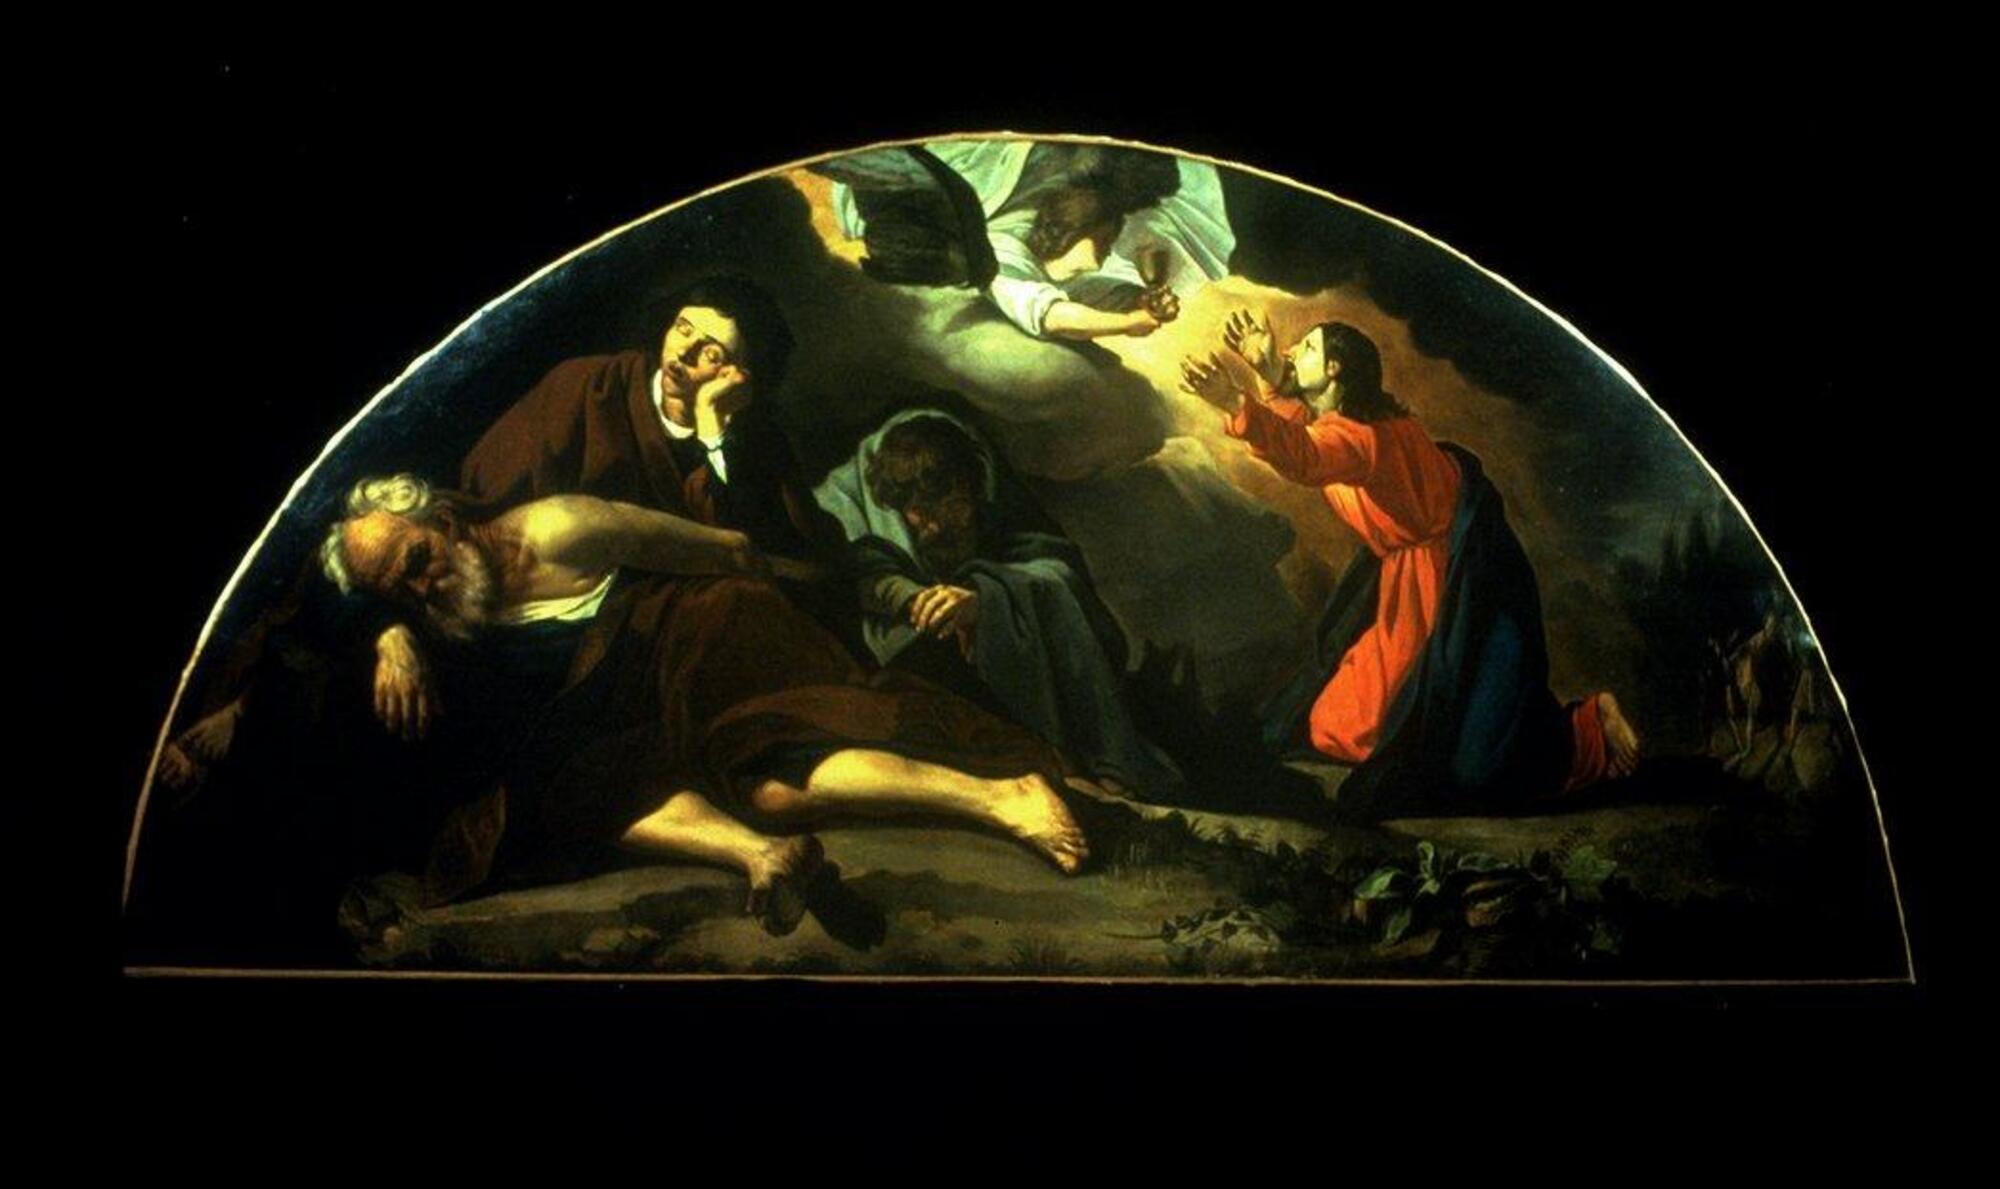 This is a large semi-circular painting (lunette) with several figures arranged to accomodate the shape of the canvas. It is night time, so the scene is enveloped in darkness. In the top center area, there is an angel, surrounded by bright light, who holds out a golden goblet toward a man kneeling before him. This man, with arms outstretched, looks up toward the goblet and the face of the angel. His face is illuminated by the light. He is wearing a bright red robe and a dark blue cloak. In the left foreground, there are three men who are sleeping. Two are sitting on the ground and the third, an elderly man with white hair, is reclining in front of them. They have dark blue and brown cloaks wrapped around them. On the lower right, shown in the far distance, is a group of people walking toward the kneeling figure. This scene is painted in dark tones of brown, green, blue and gray, except for the red robe of the kneeling man and areas on faces, arms and legs which are highlighted by a bright light.